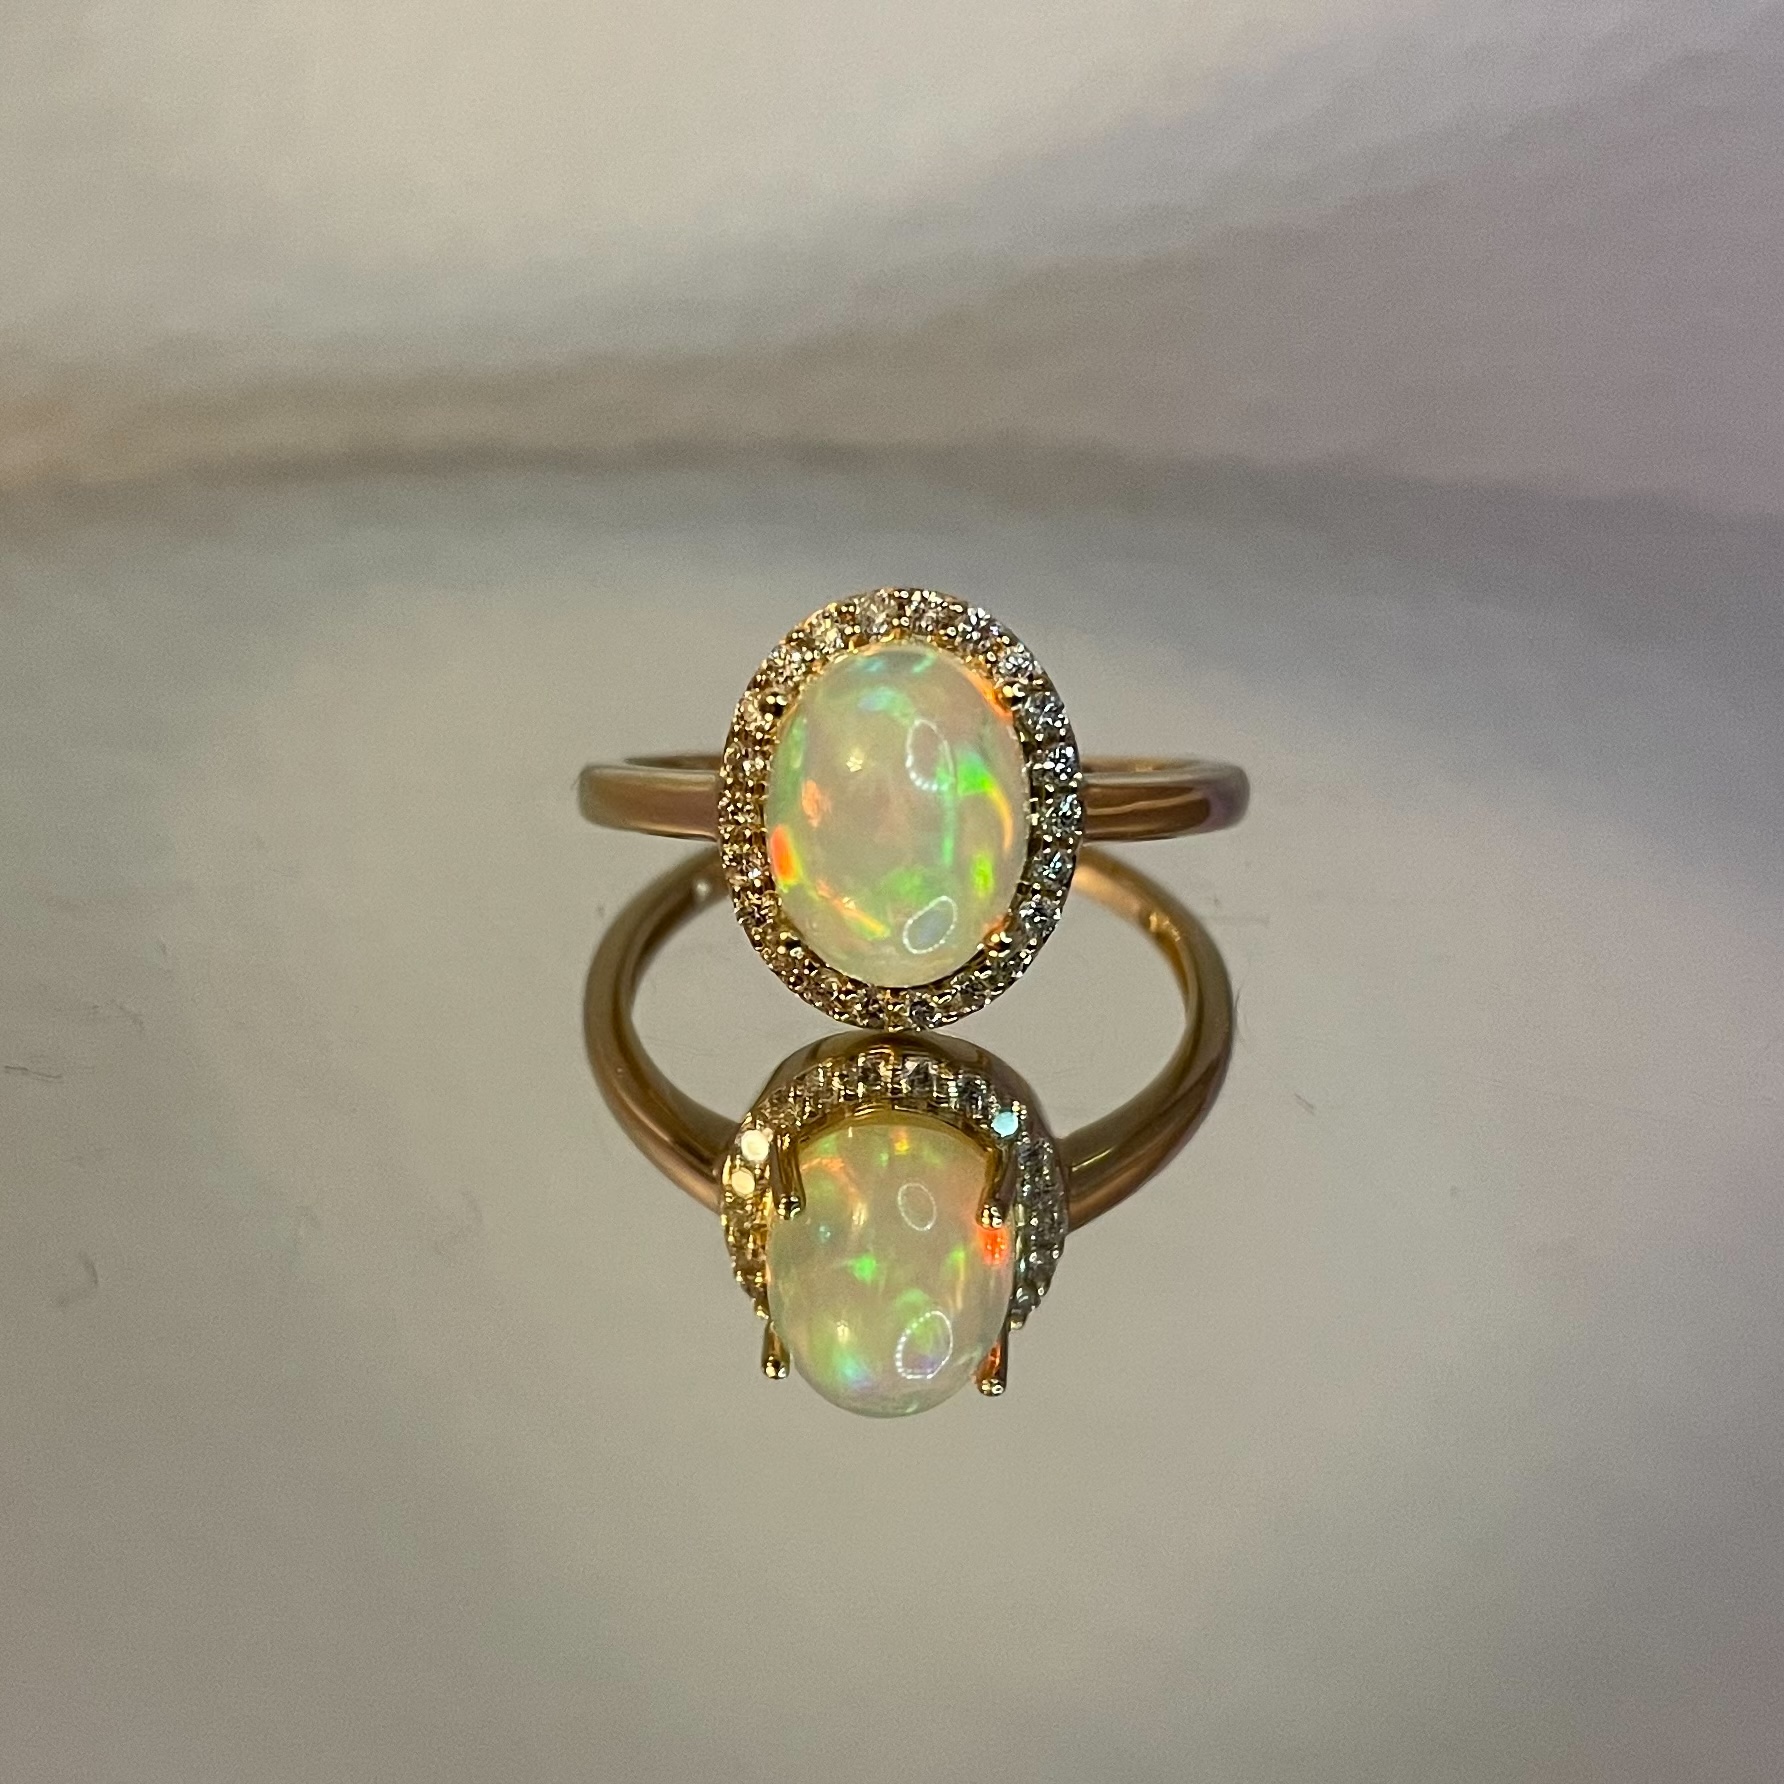 Beautiful Natural Opal Ring With Diamonds And 18k Gold - Image 2 of 6